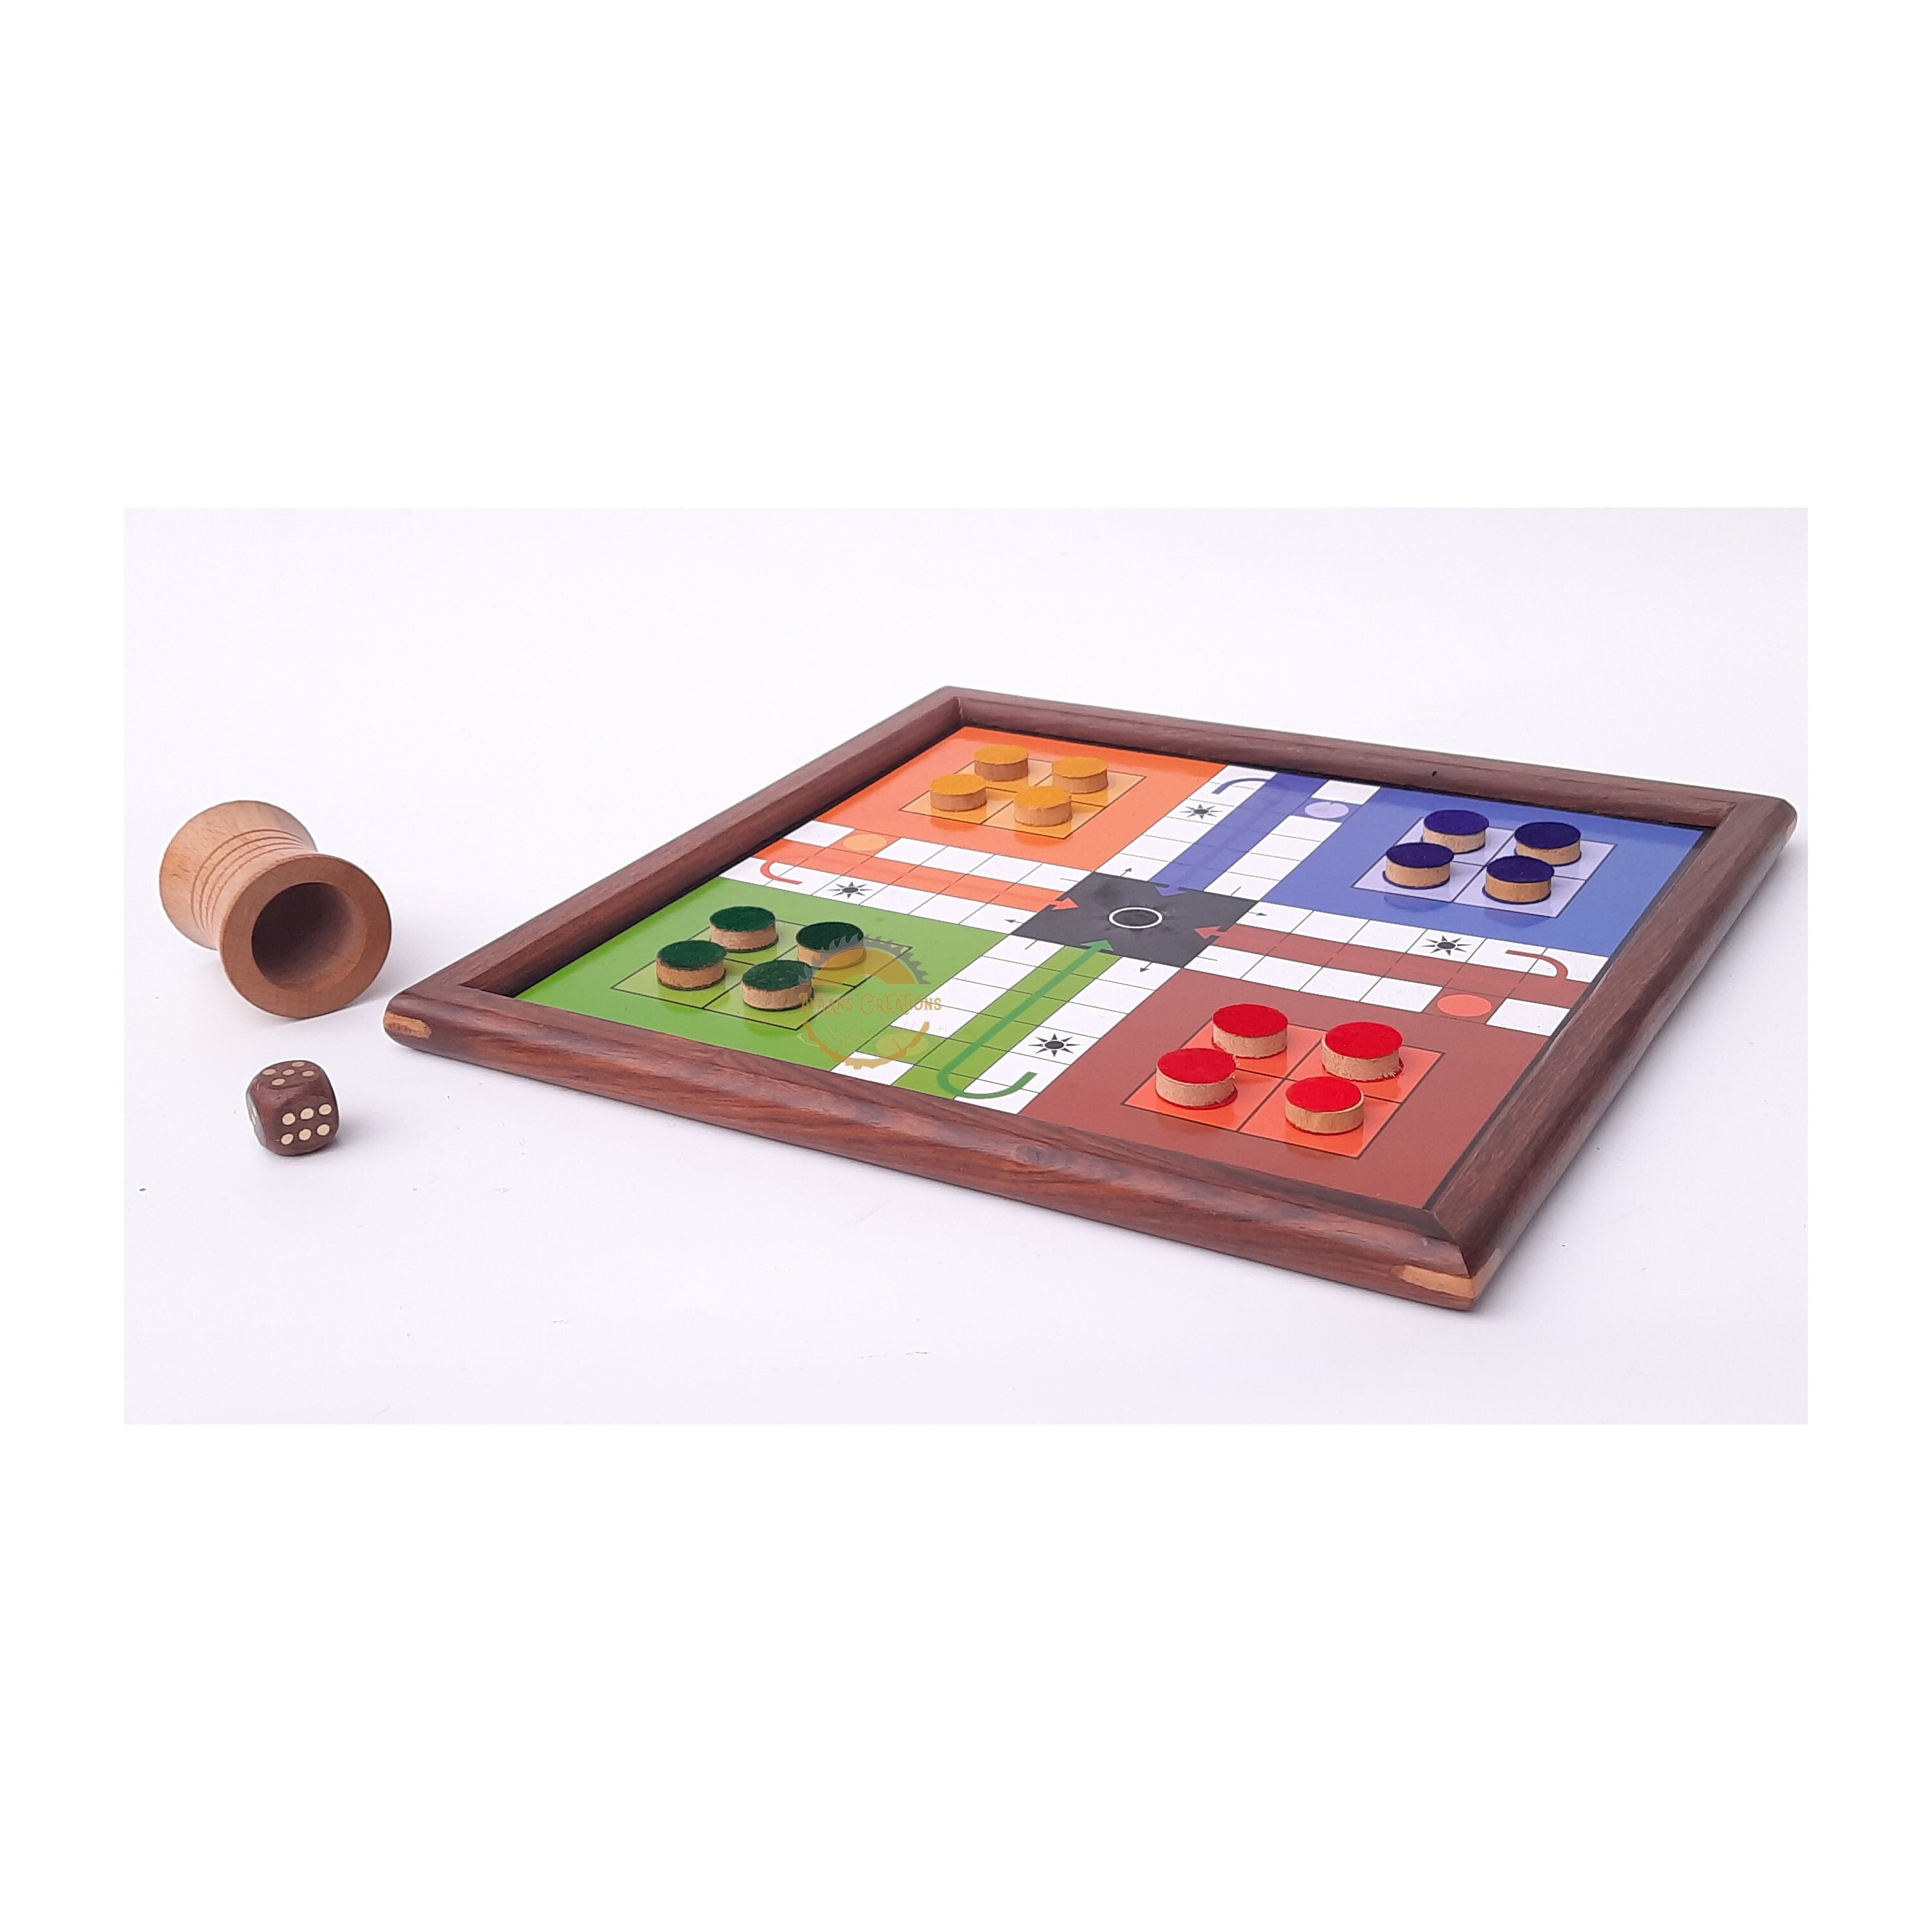 Board Game Set - Deluxe 15 in 1 Wood Tabletop Games with Storage -Checkers,  Chess, Chinese Checkers, Parcheesi, TicTacToe, Solitaire, Snakes and  Ladders, Mancala, Backgammon, Poker, Dice 